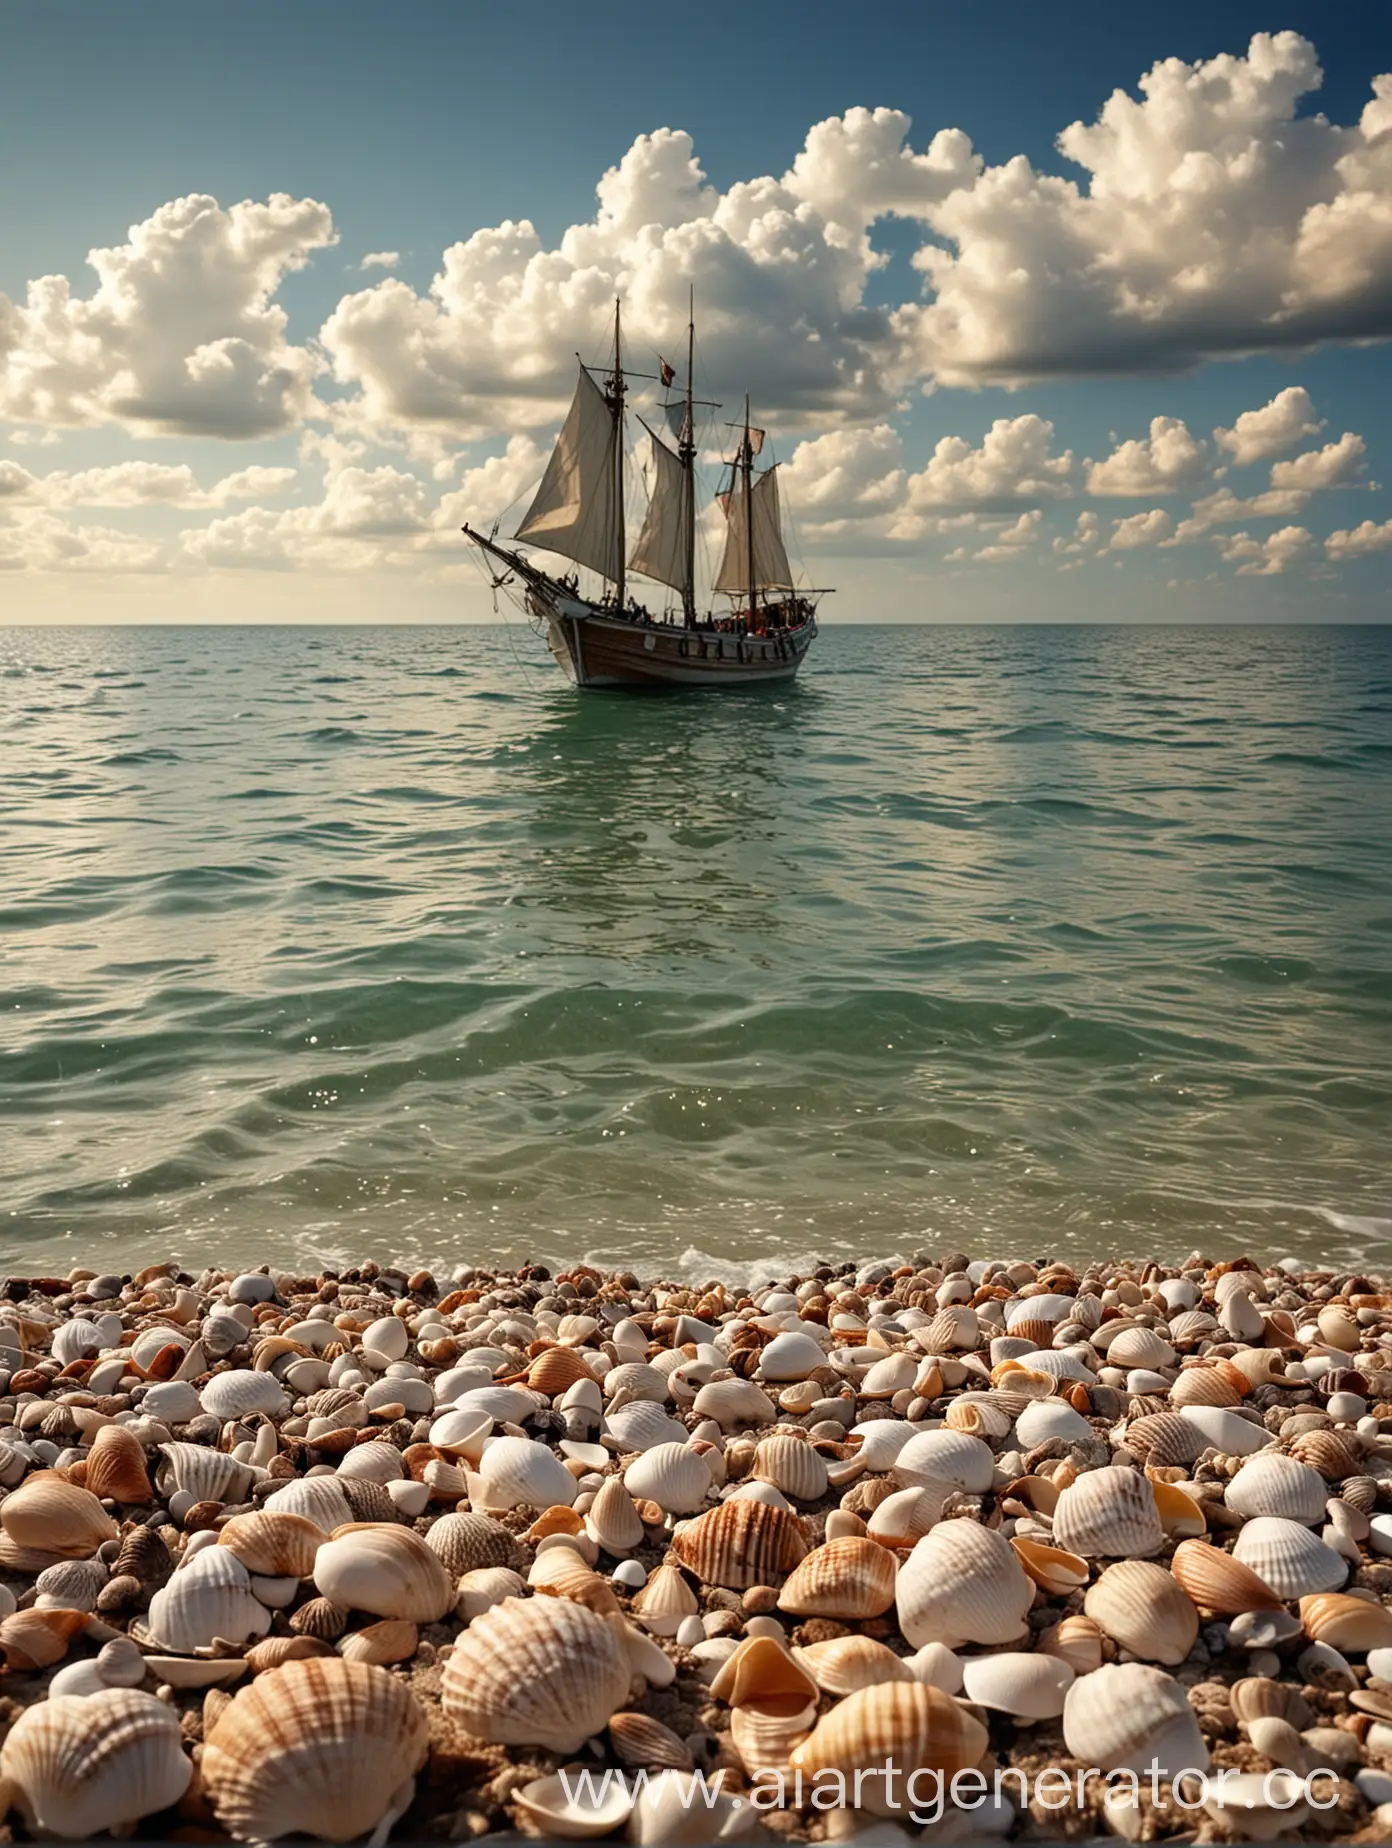 Seashells-on-a-Boat-in-Tranquil-Seascape